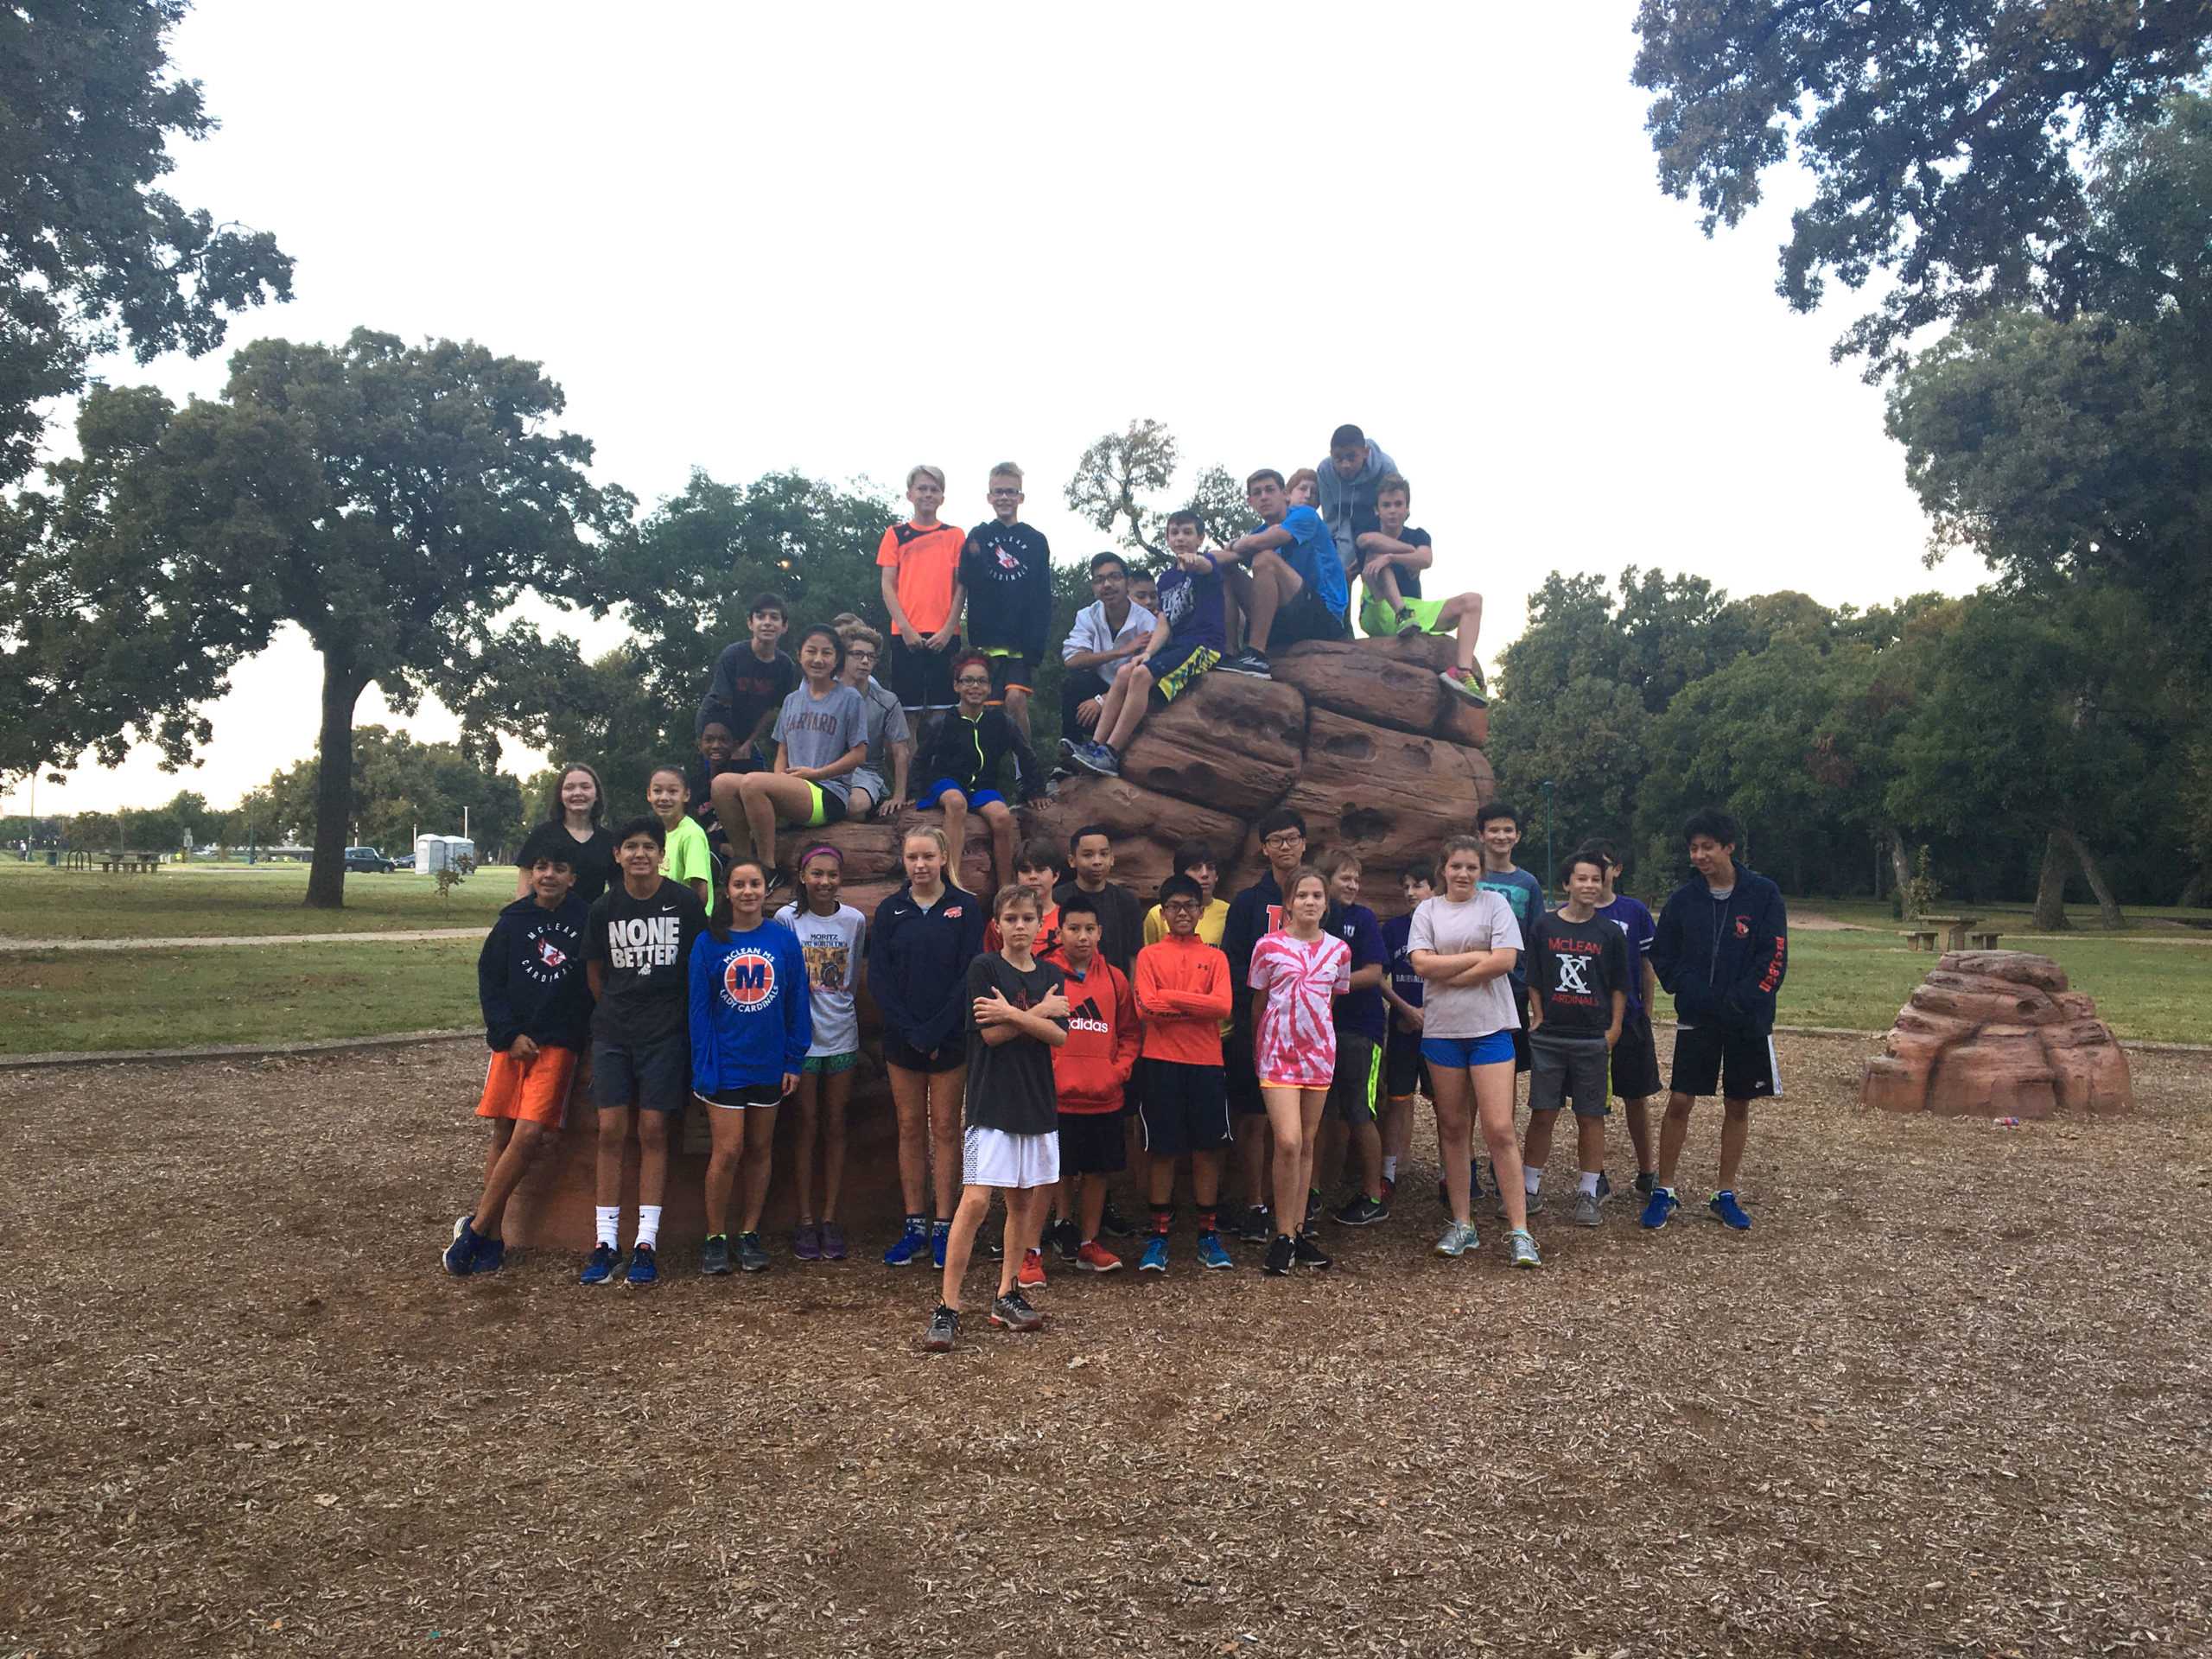 The McLean Middle School cross country team met at Trinity Park at 7am on Saturday for practice.